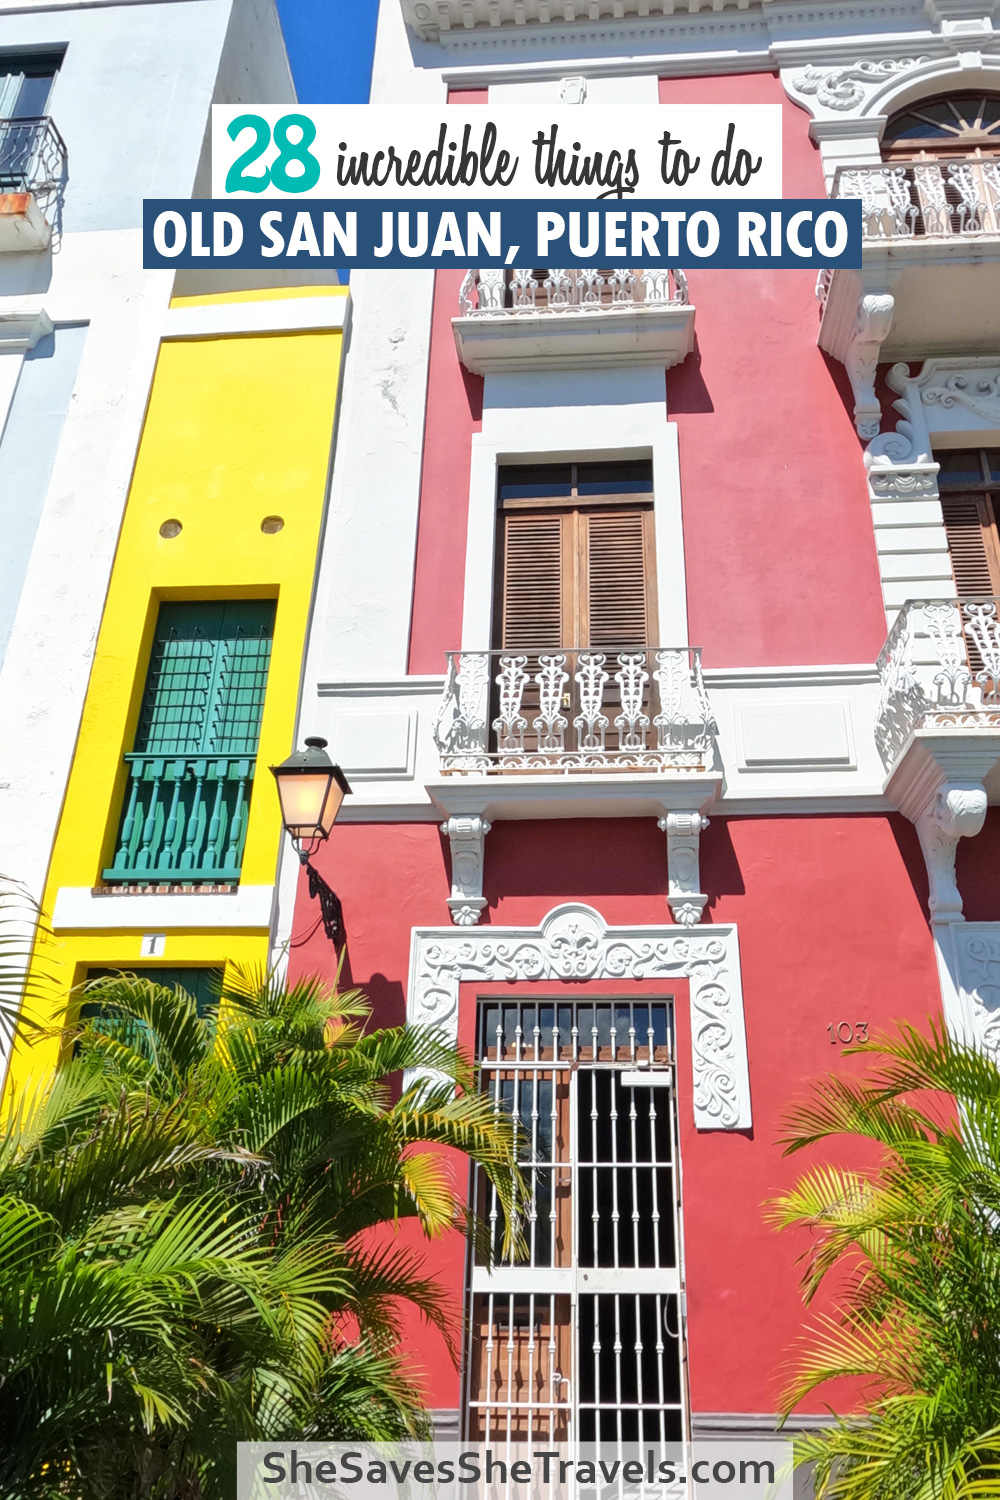 28 incredible things to do Old San Juan Puerto Rico with red and yellow buildings and balconies in background